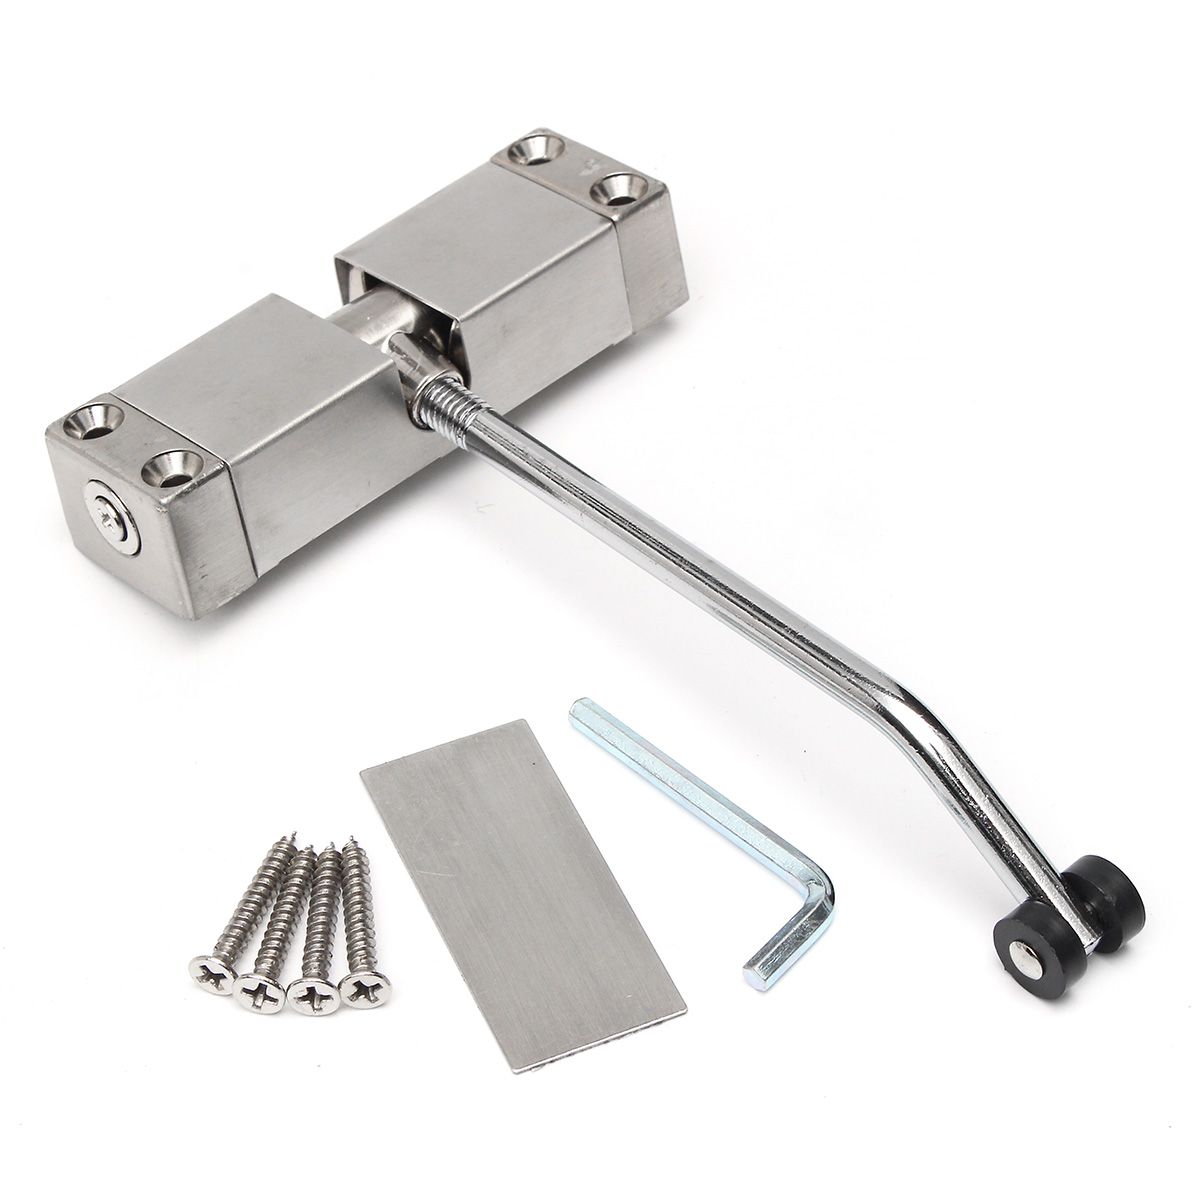 Stainless-Steel-Adjustable-SurfacE-Mounted-Automatic-Spring-Closing-Door-Closer-1151456